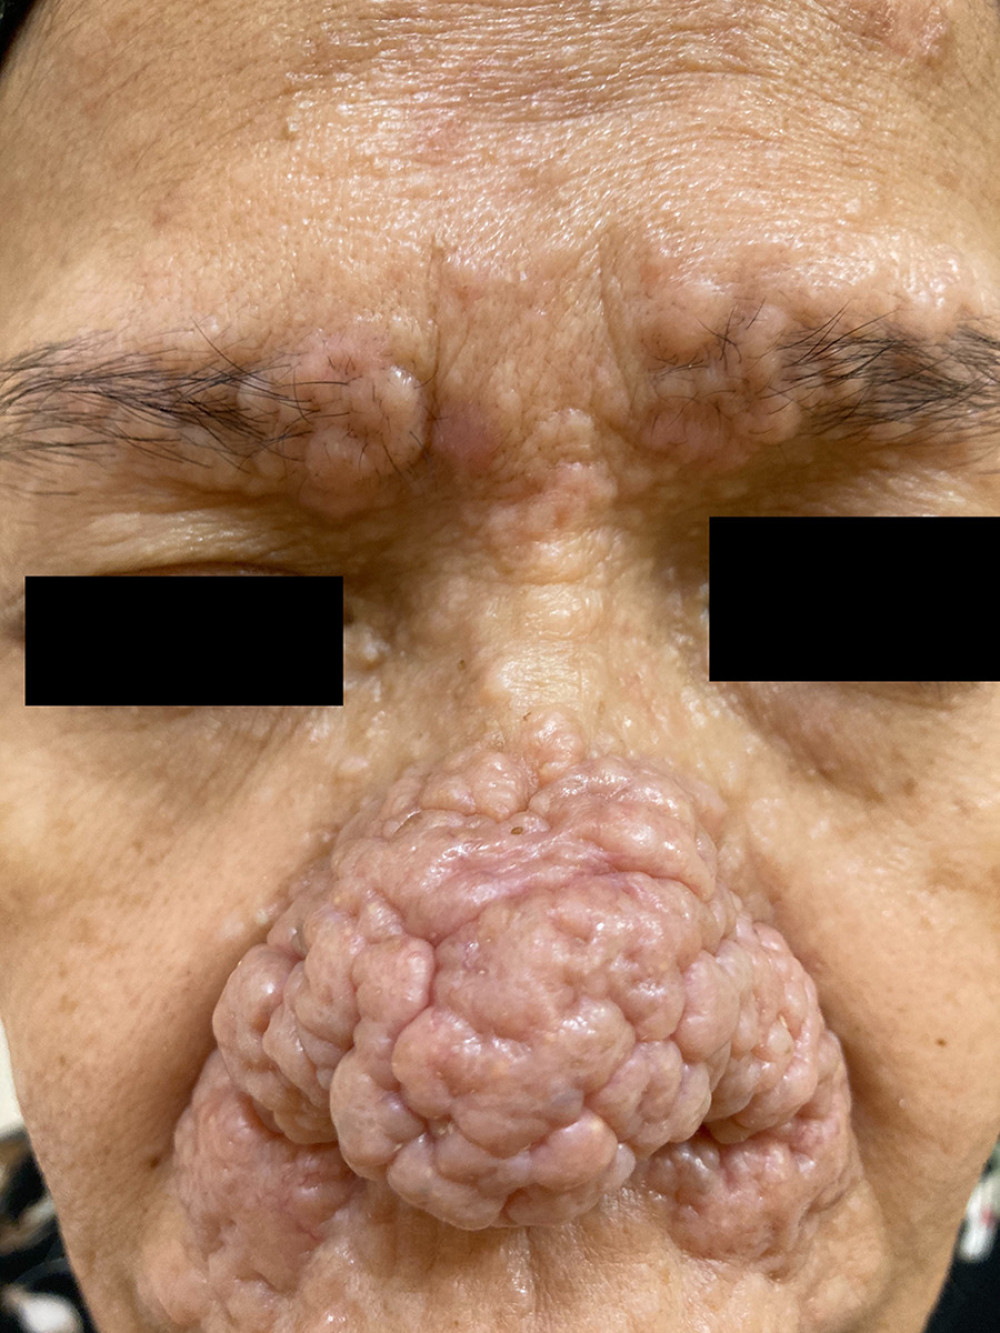 Closer view of multiple rounded whitish and skin-colored papules and nodules on the nasal and perinasal areas, eyebrows, and forehead.